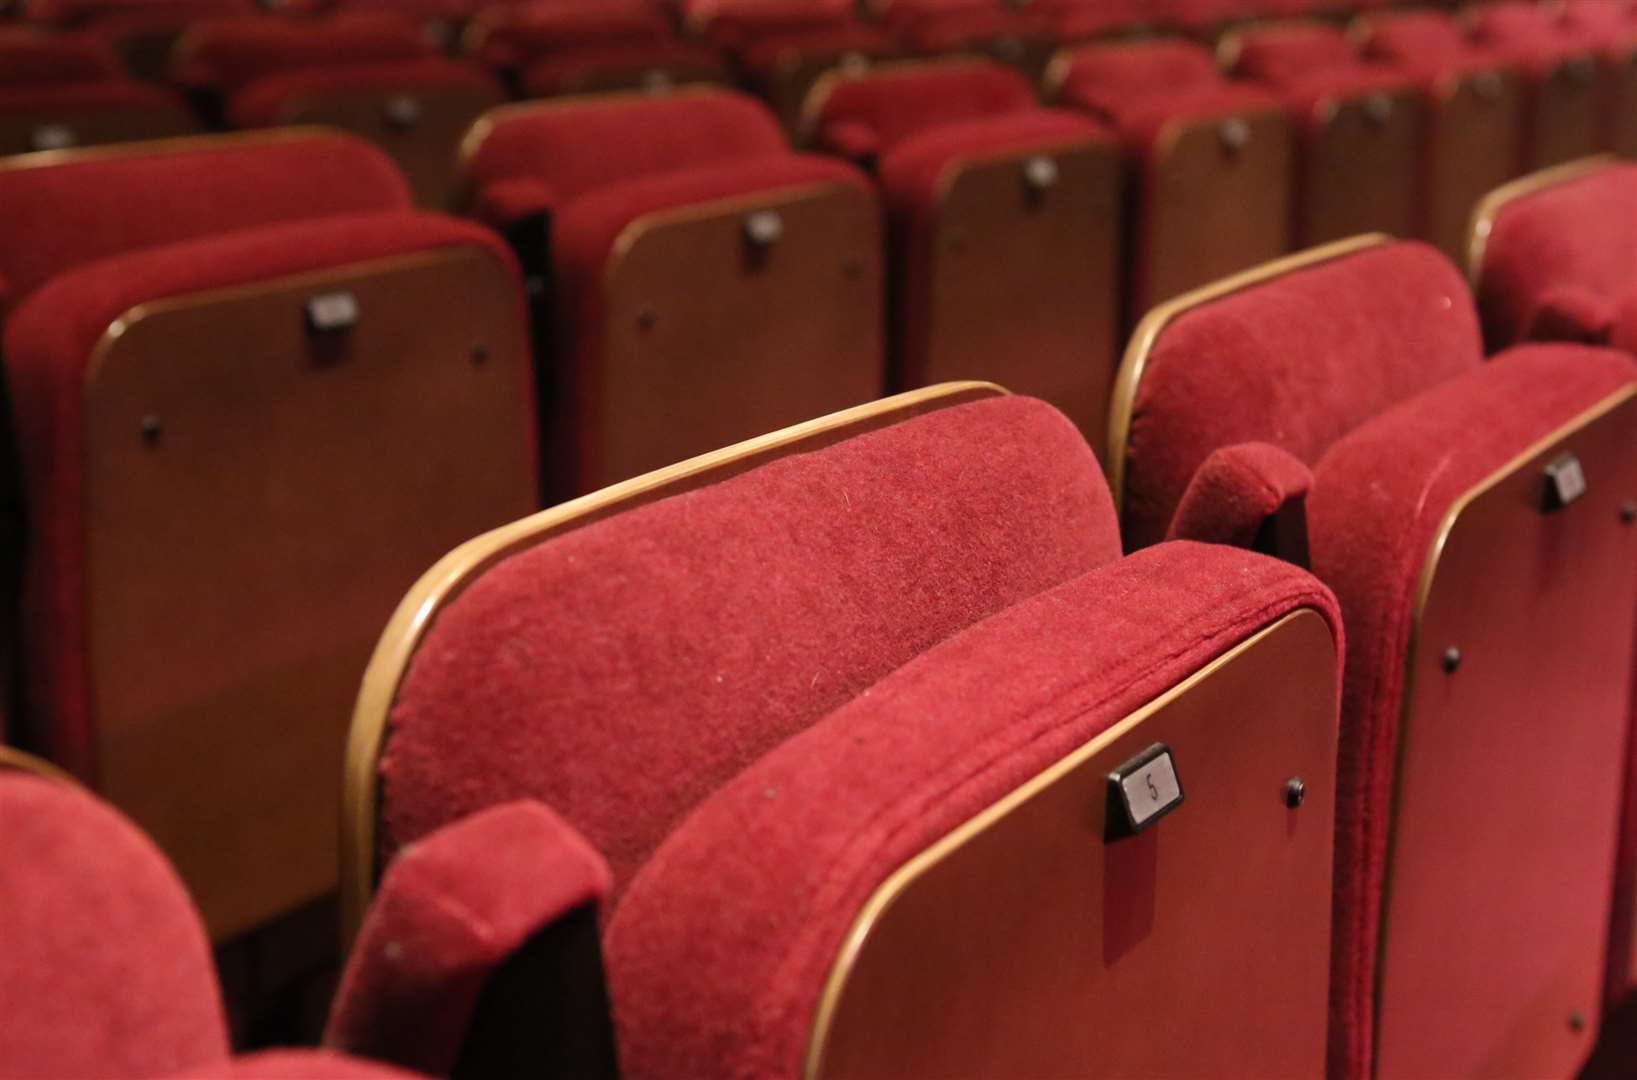 Seats at the Hazlitt Theatre in Earl Street have been empty for months. Picture: Martin Apps